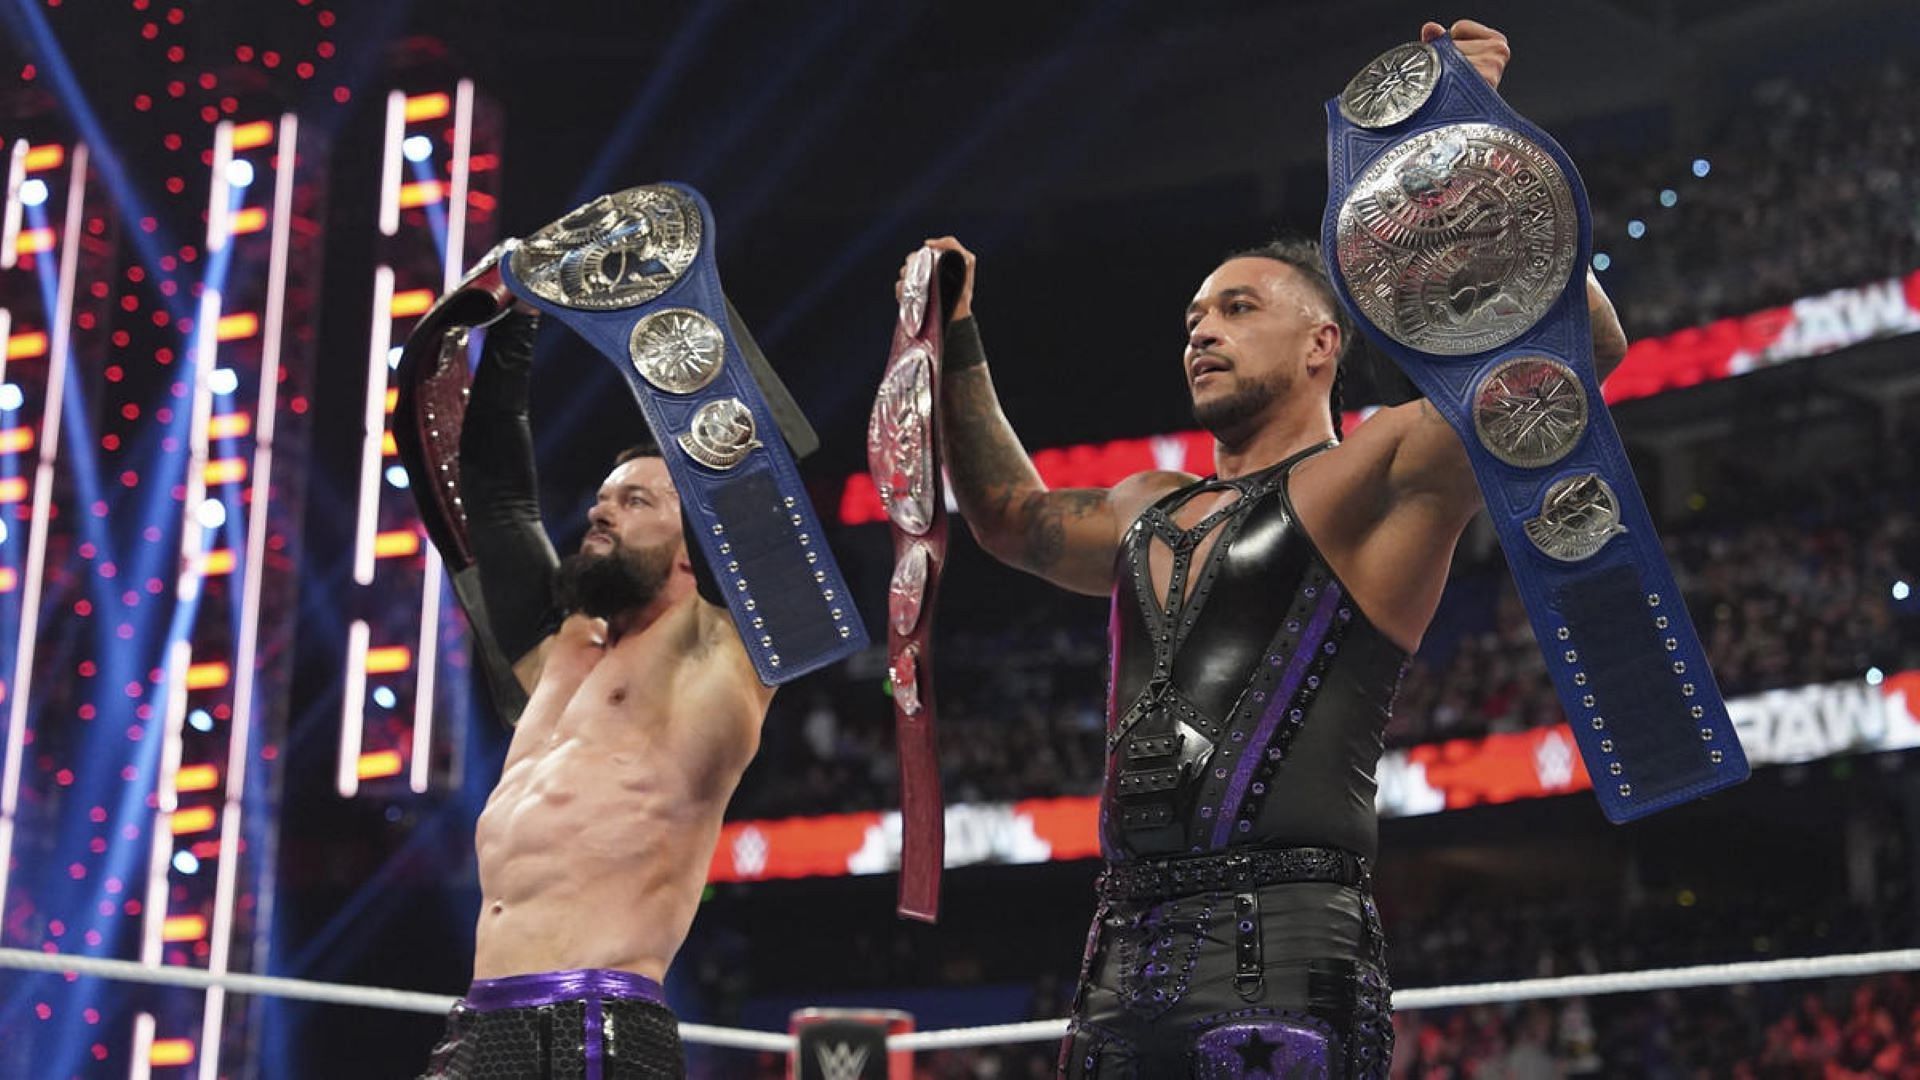 Finn Balor and Damian Priest are in their second reigns as Undisputed Tag Team Champs.